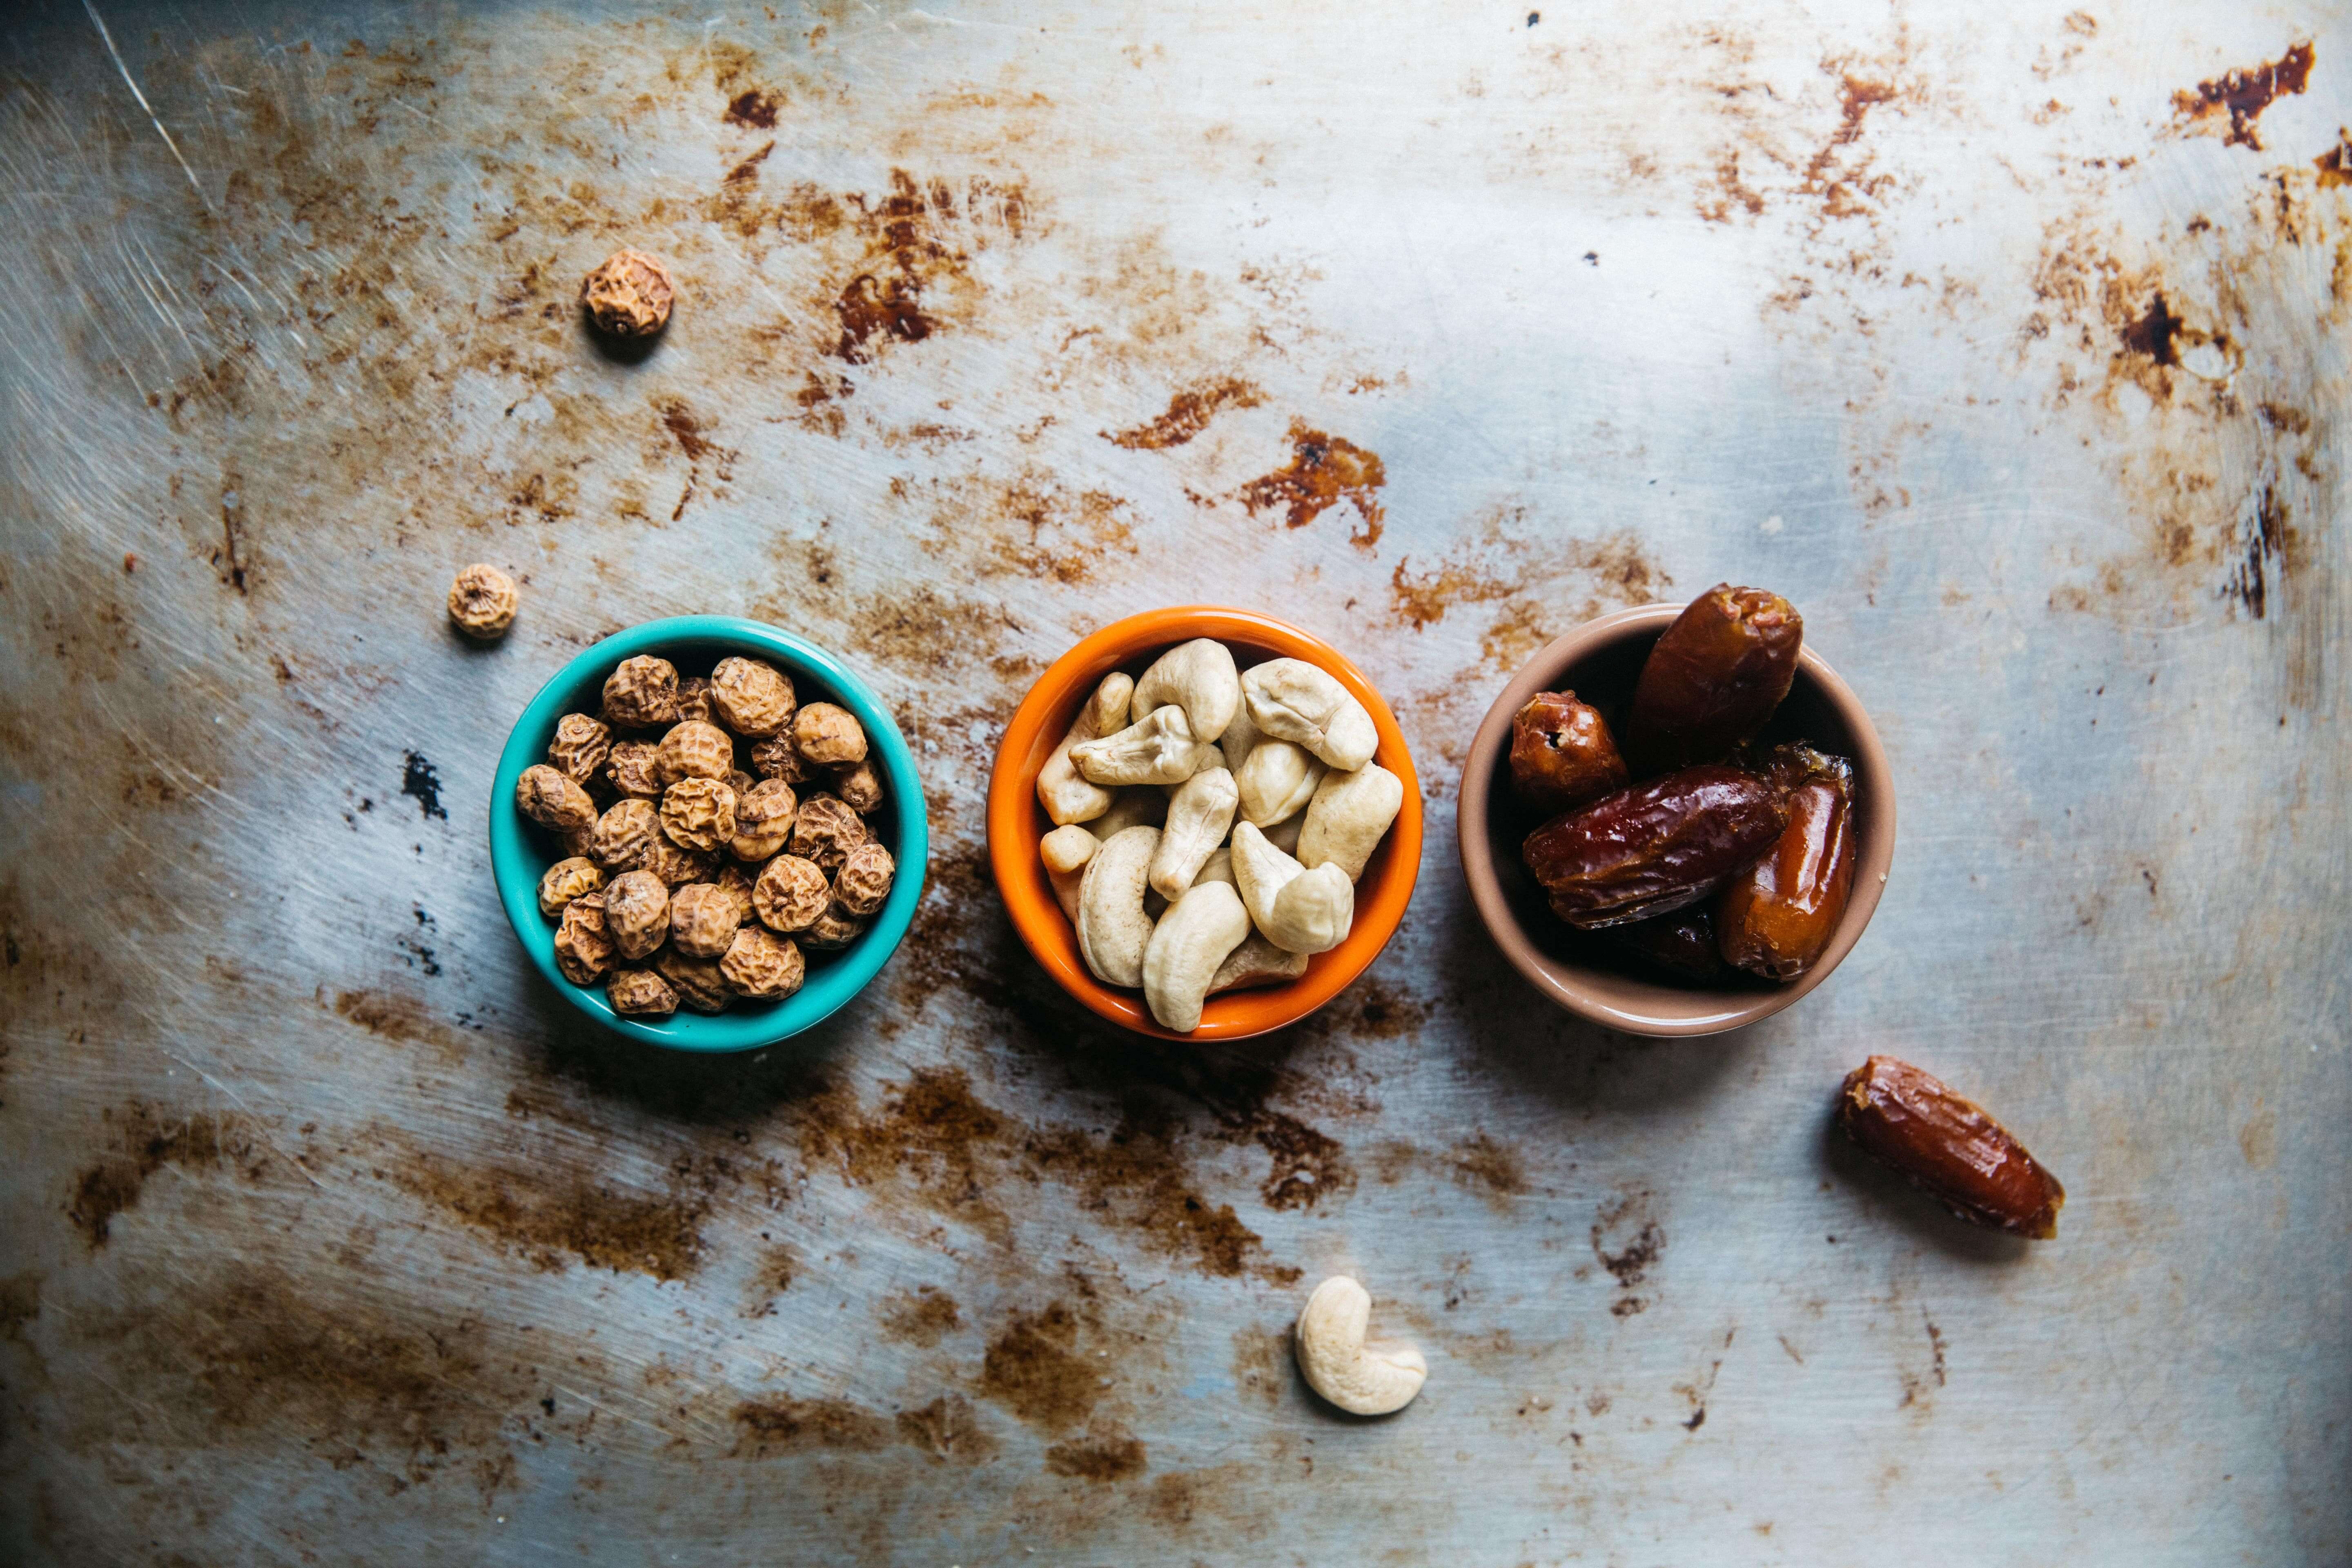 one of the serious allergy types is a nut allergy